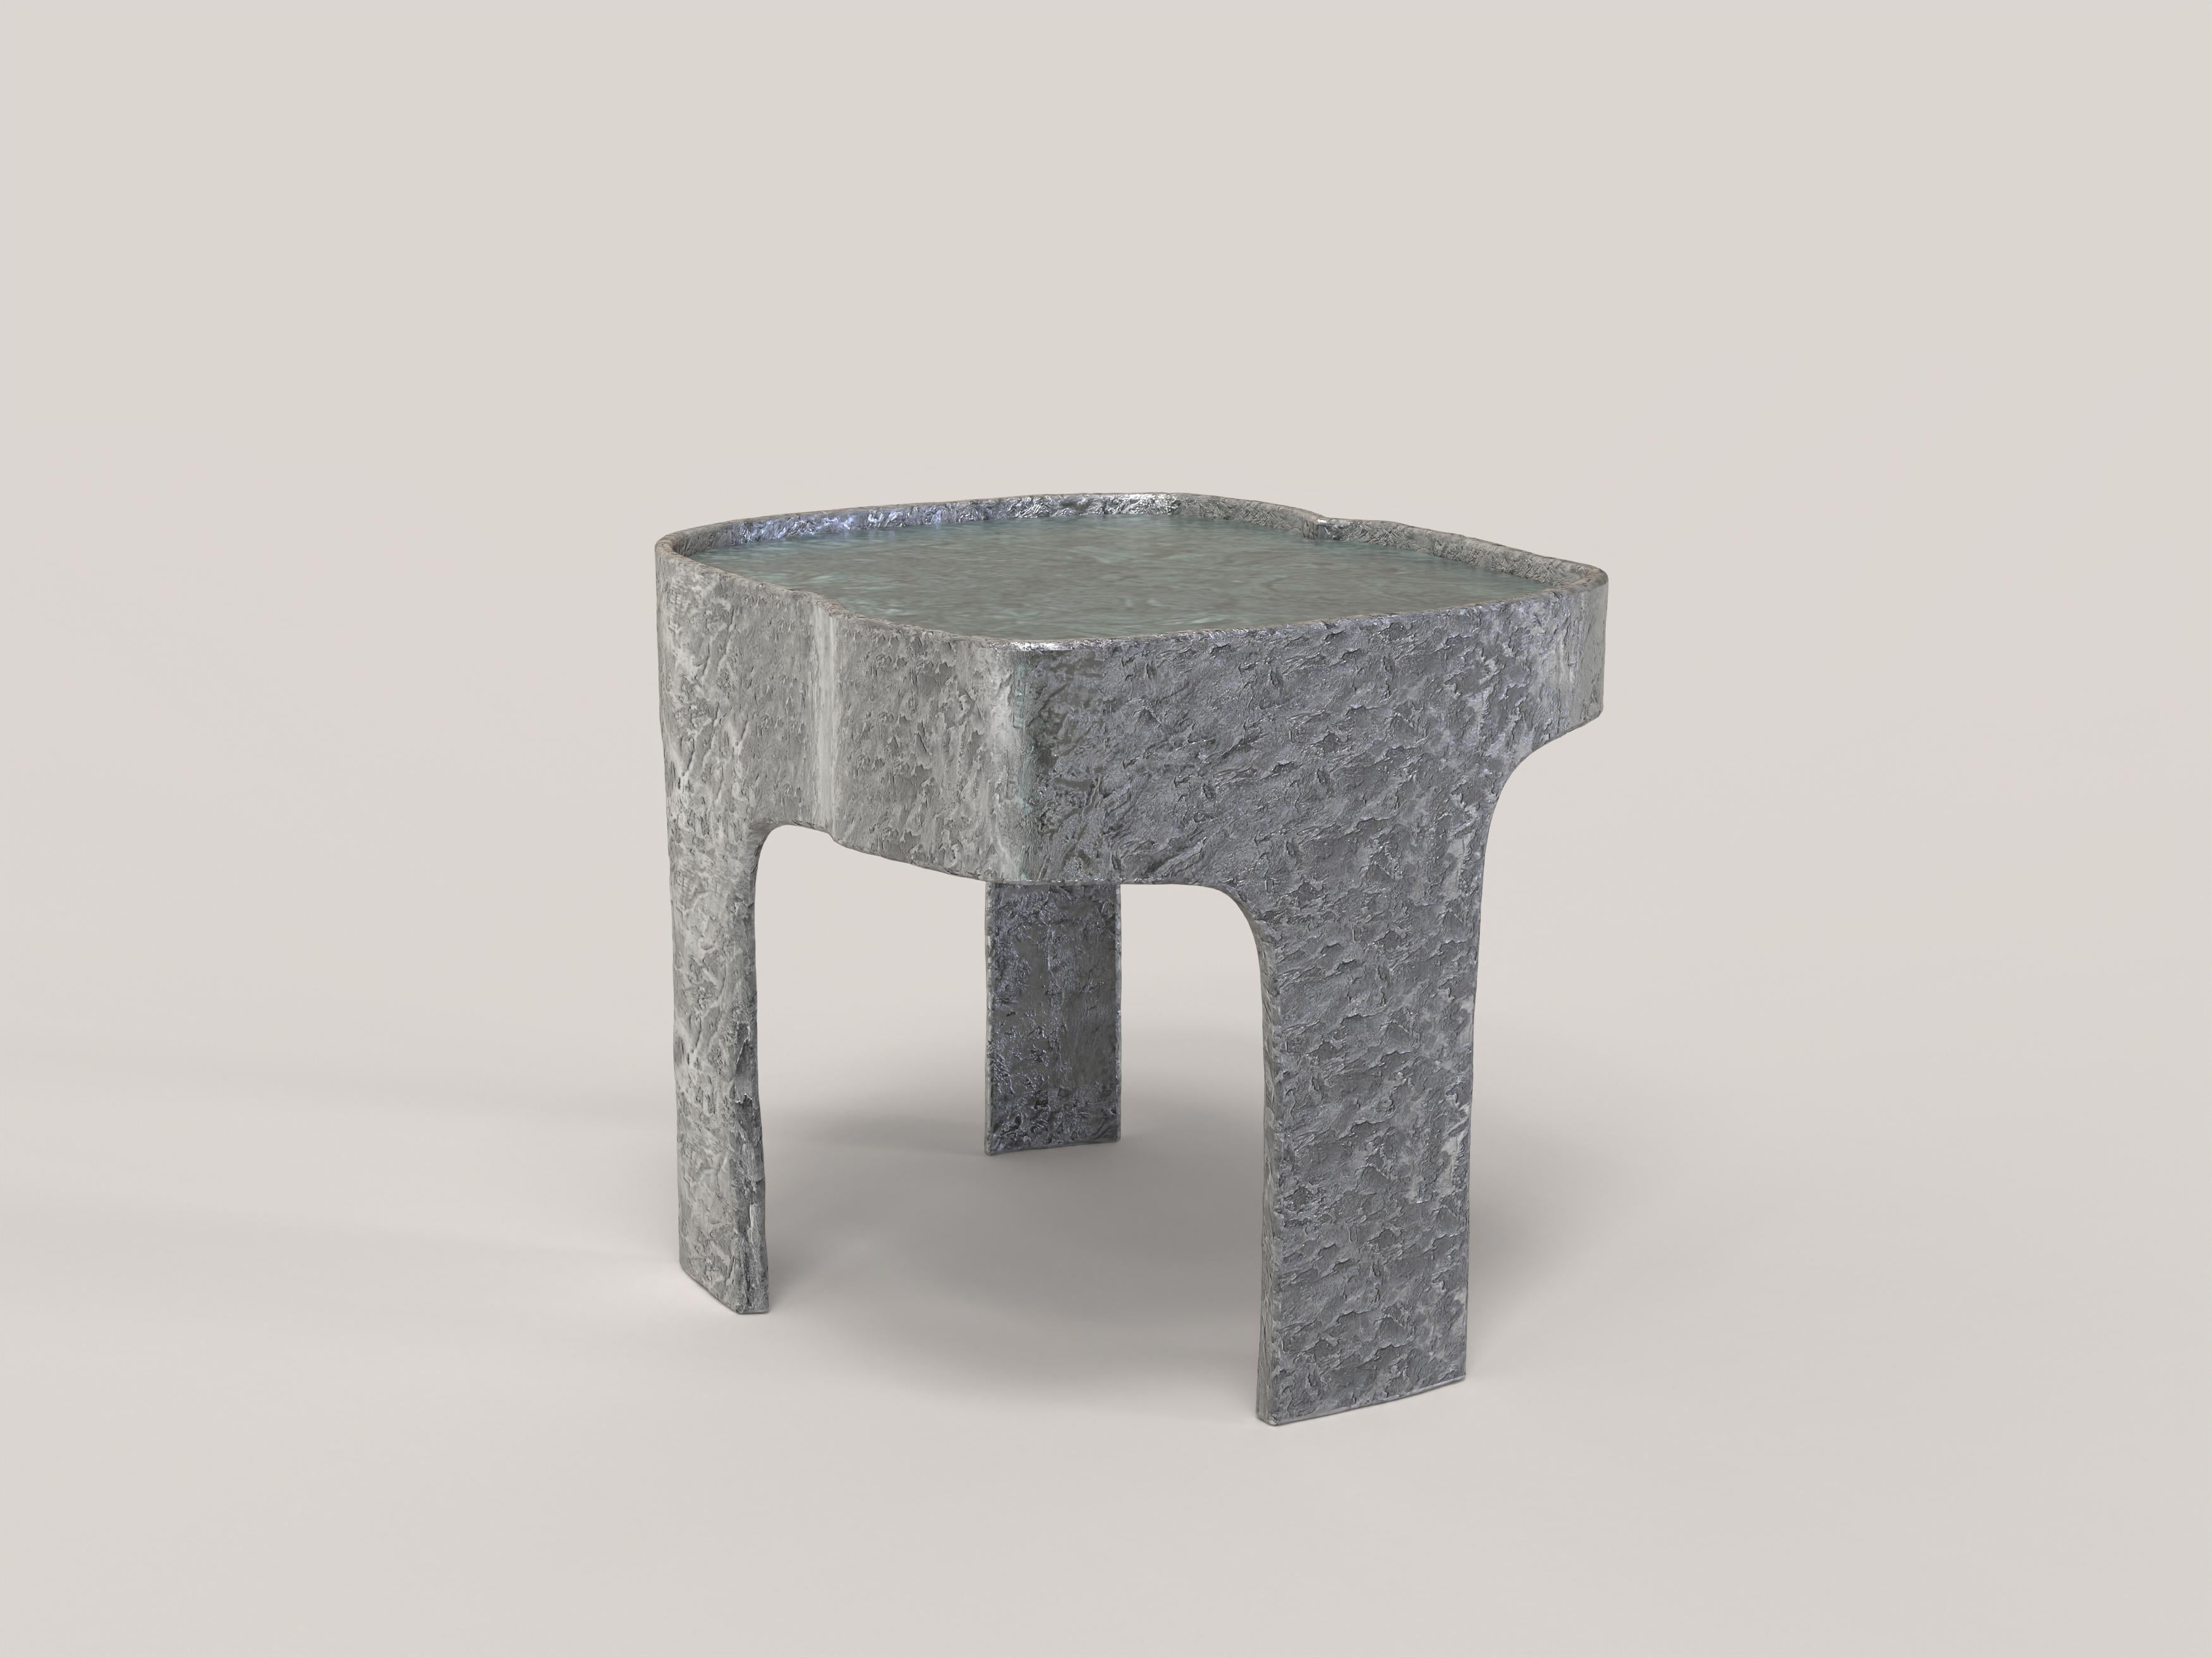 Sumatra V1 is a 21st Century side table made by Italian artisans in aluminium with an extraordinary Green Guatemala marble plane. It is part of the collectible design language Sumatra that has been developed by the Edizione Limitata's art research